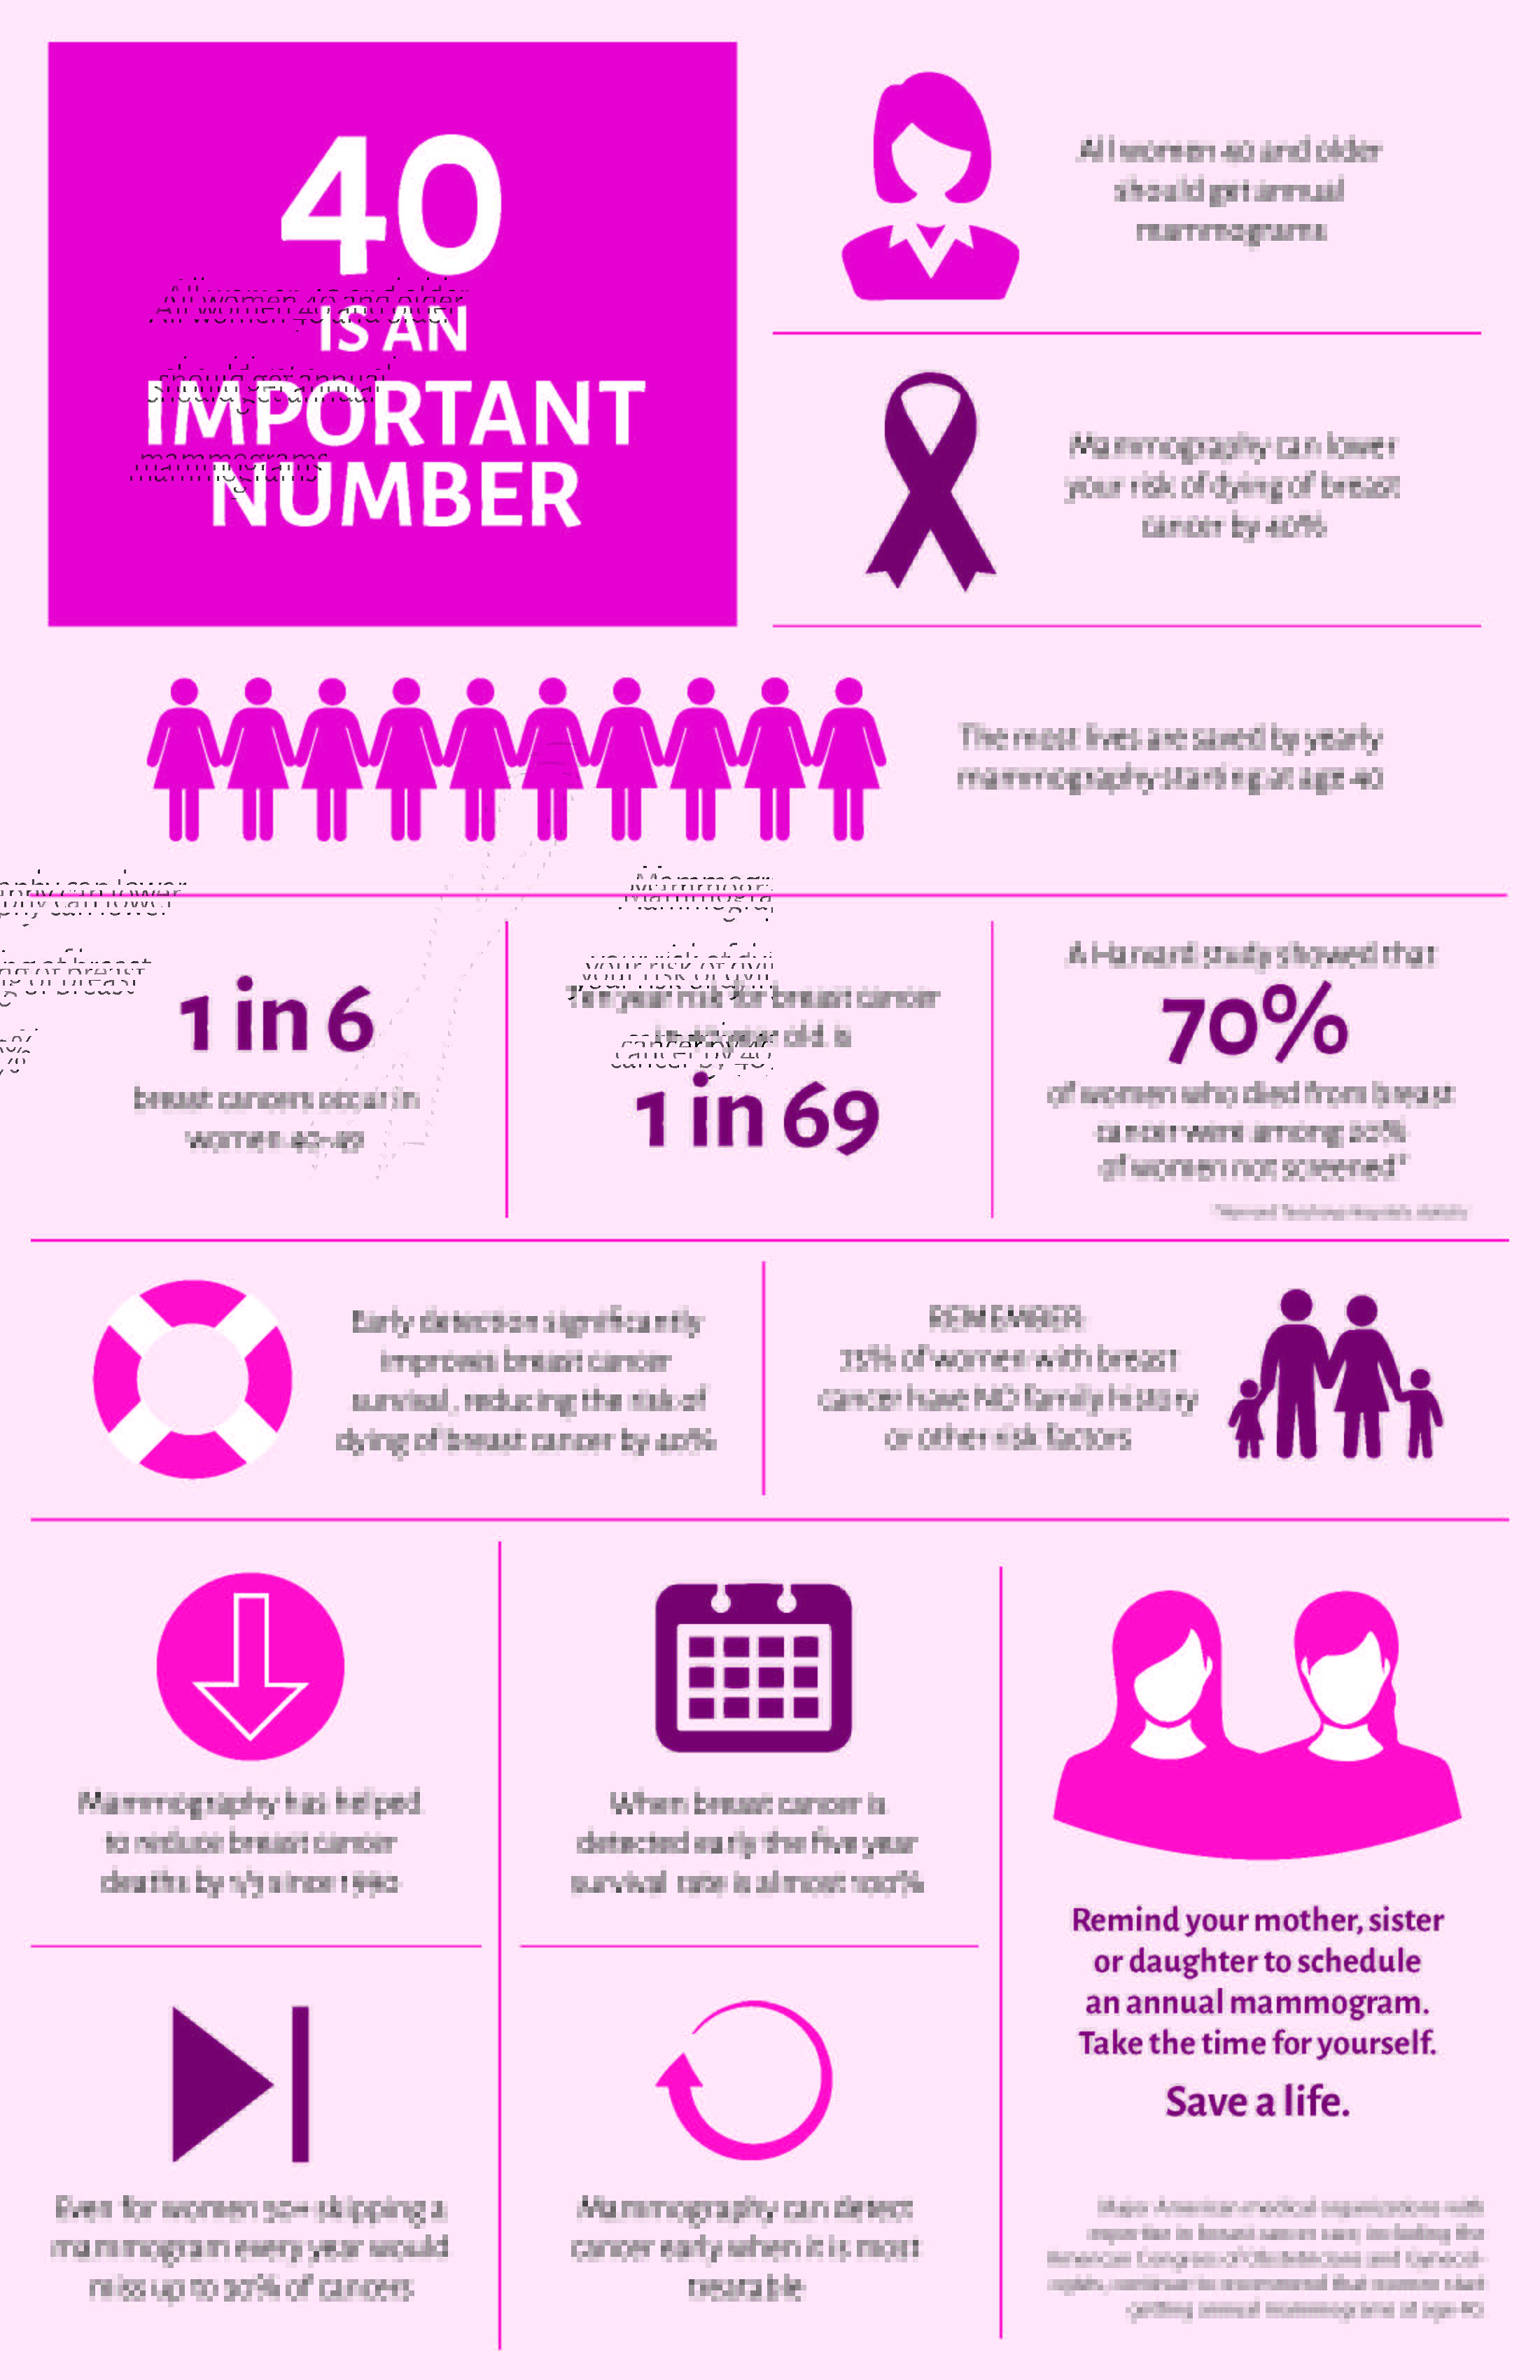 Breast Cancer Screening Saves Lives